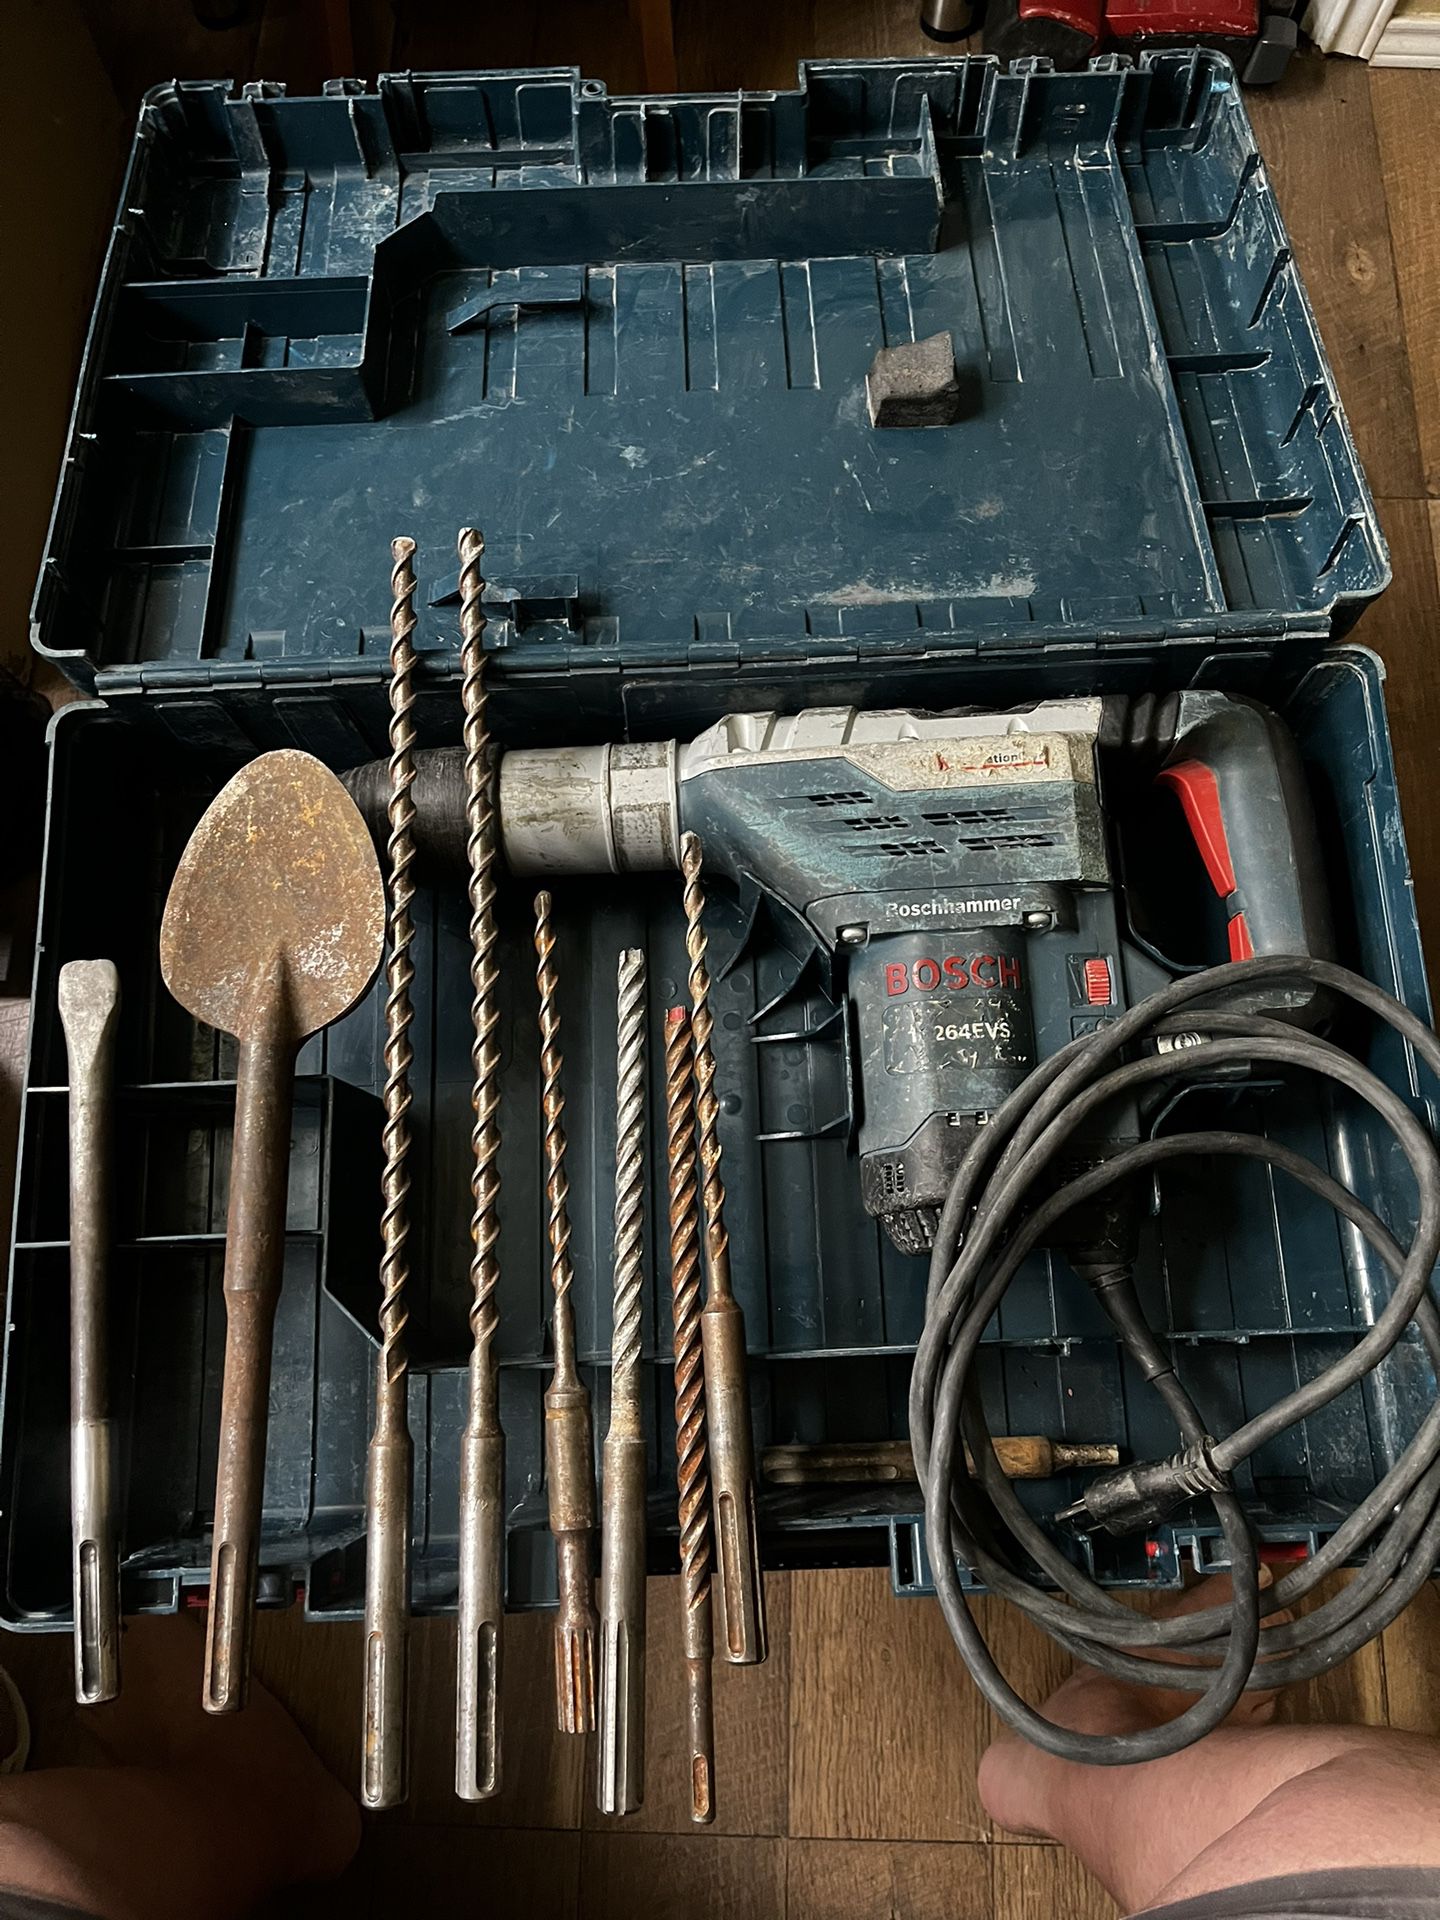 Bosch 11264EVS Hammer Drill Combo With Bits. 